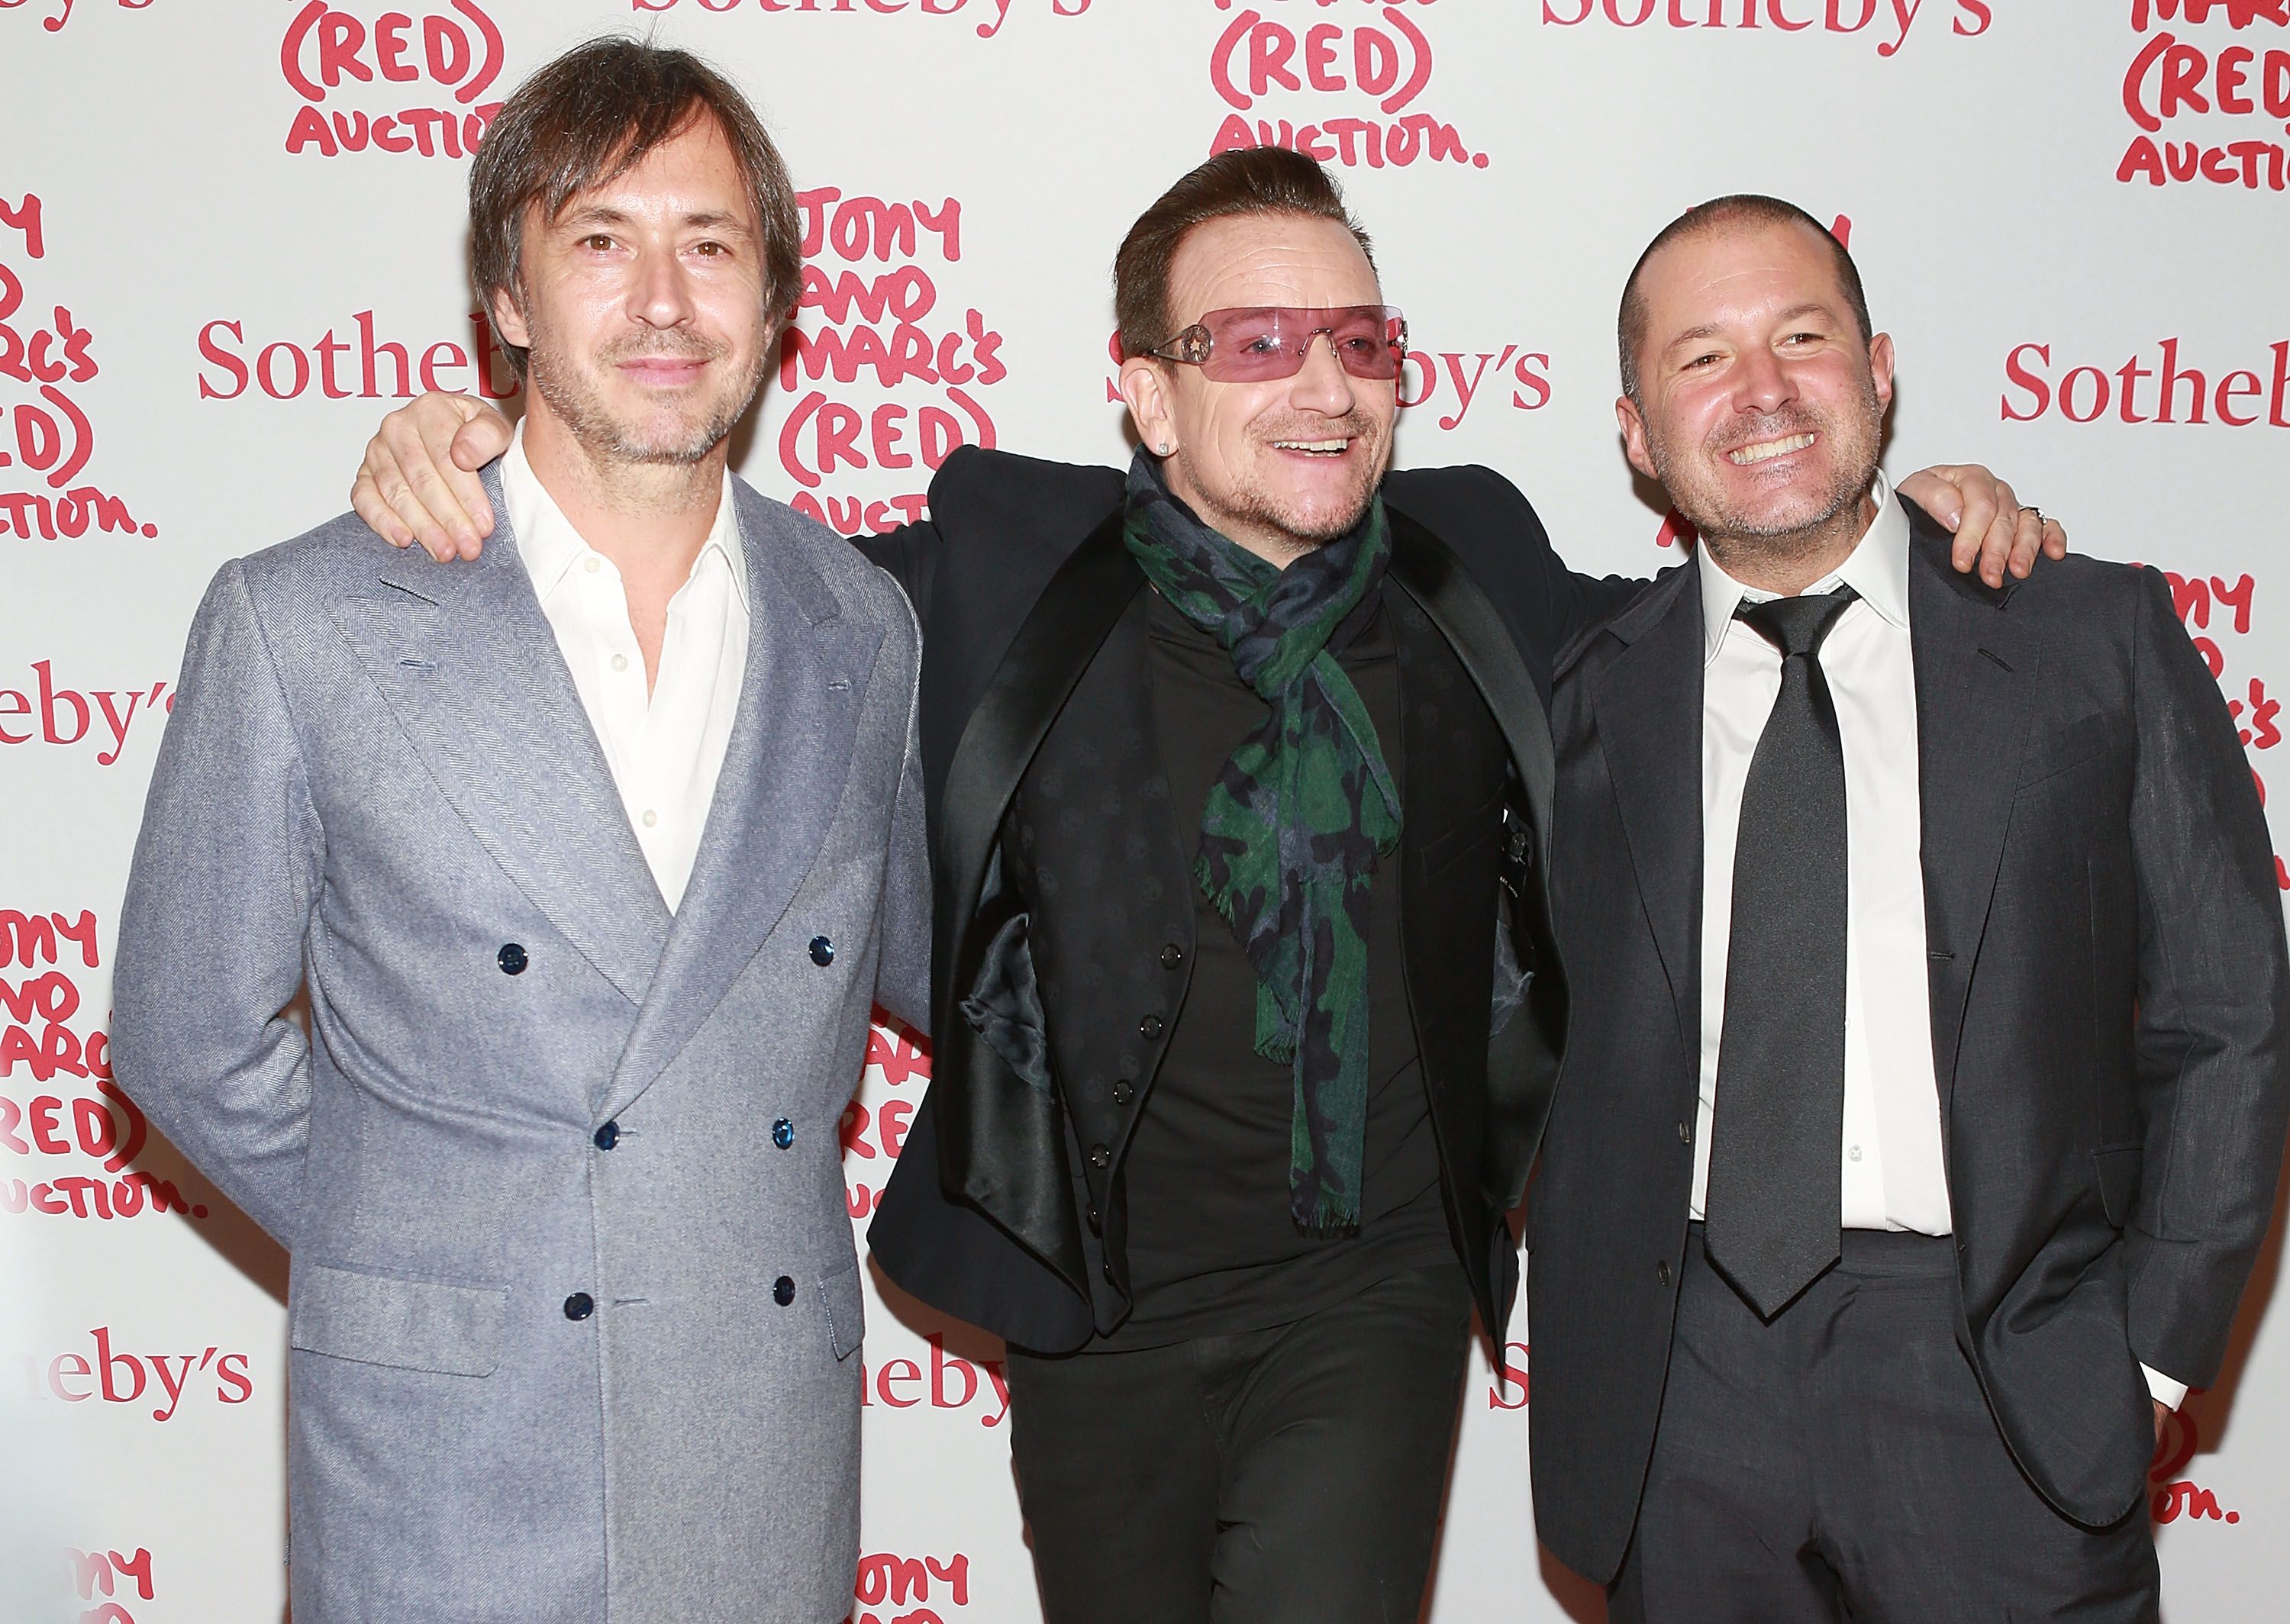 Jony Ive And Marc Newson Customize An Unreleased Mac Pro For (RED